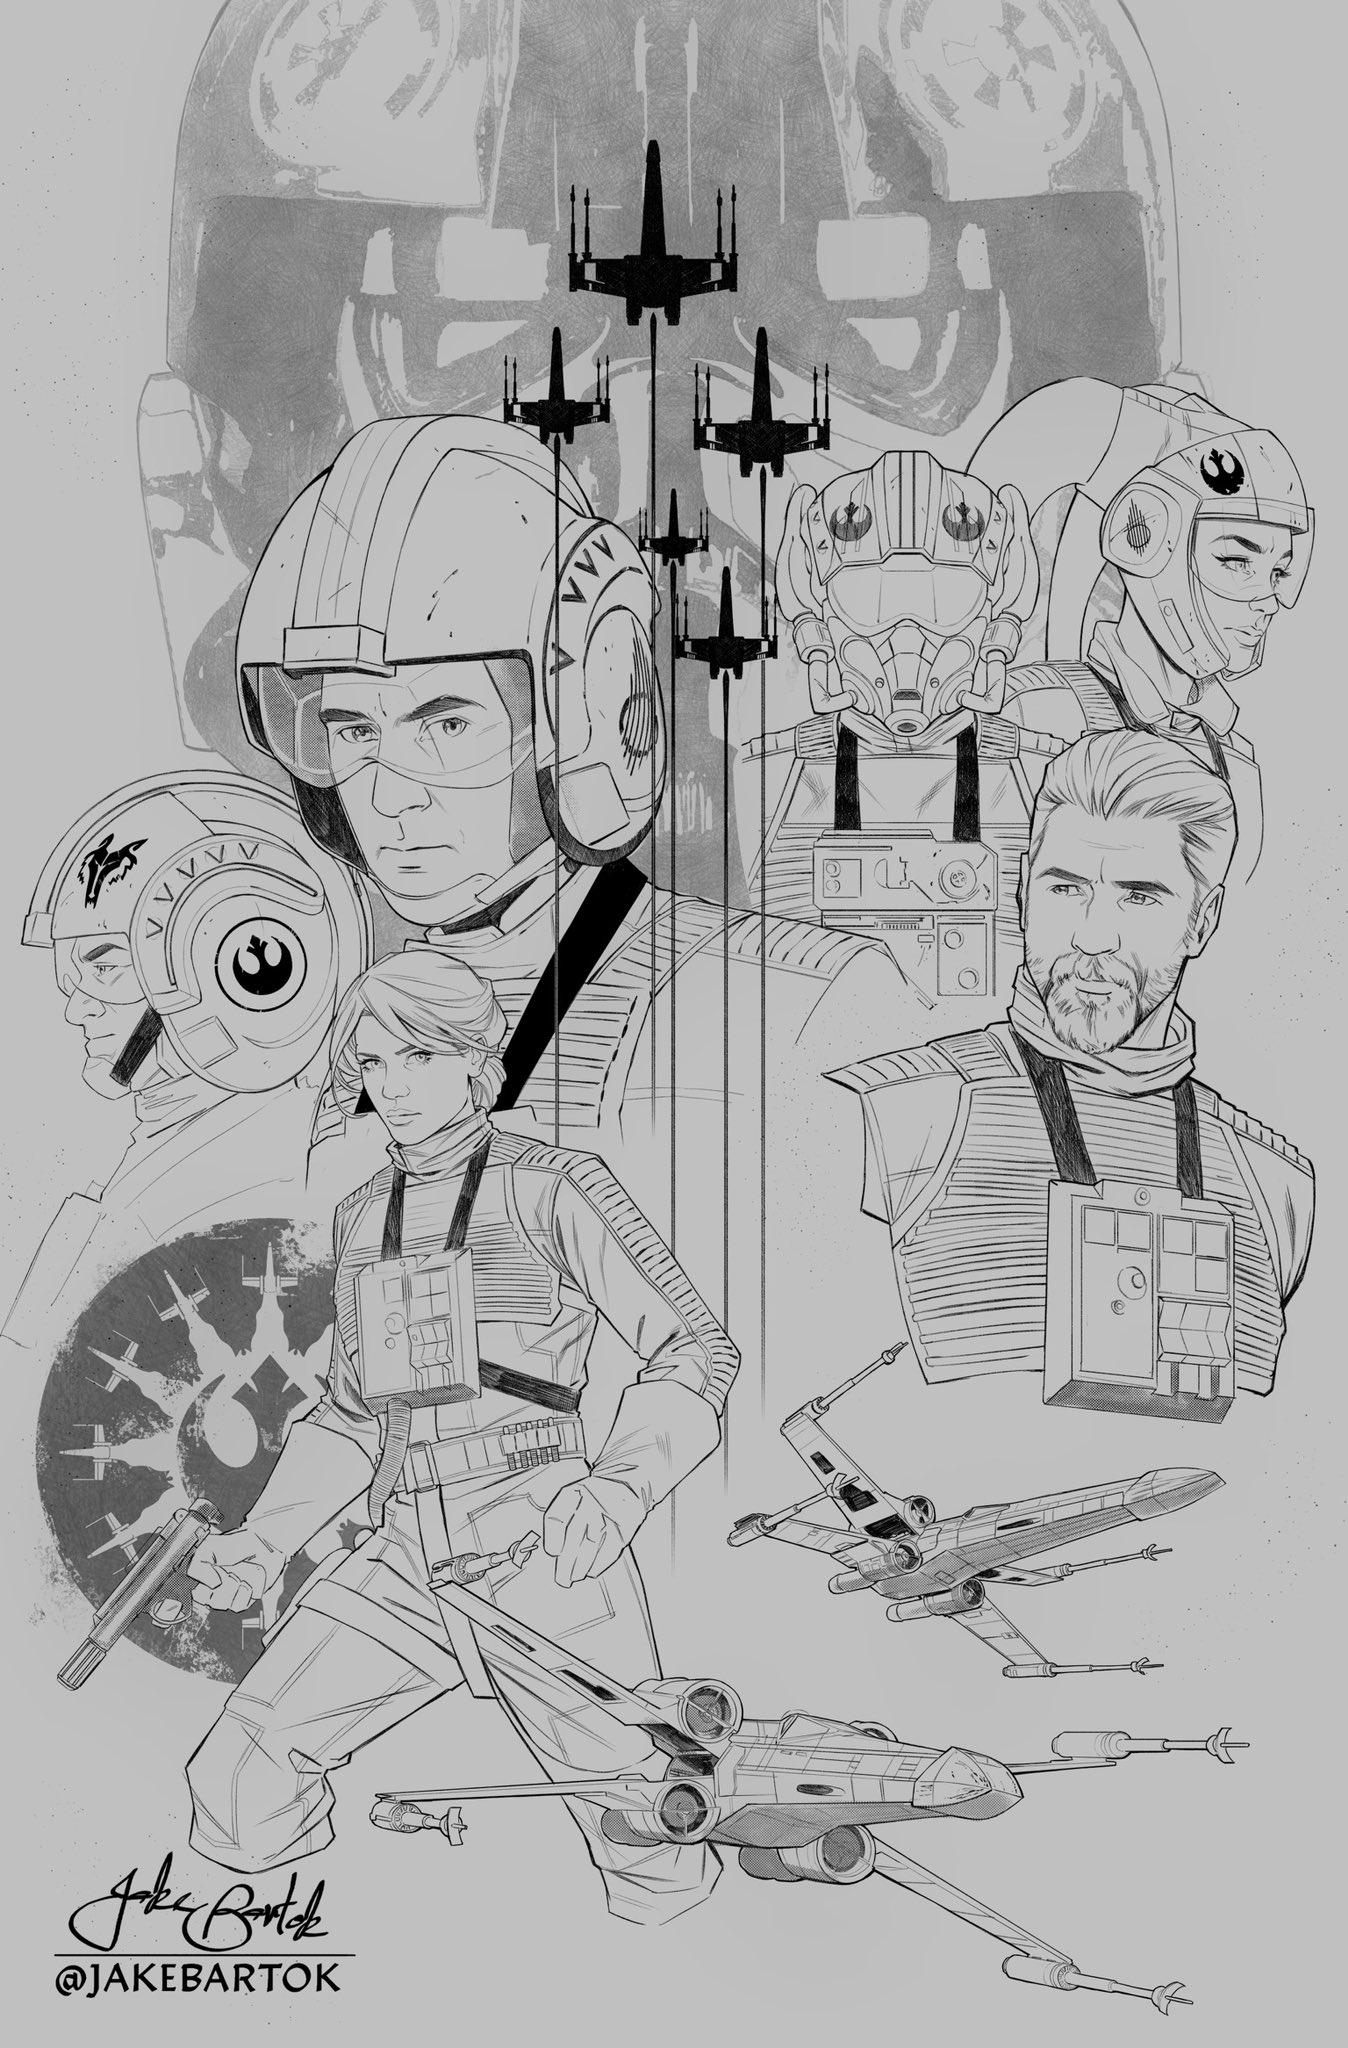 Jake bartok on x with the movie seemingly dropped i would love to see and draw a rogue squadronx